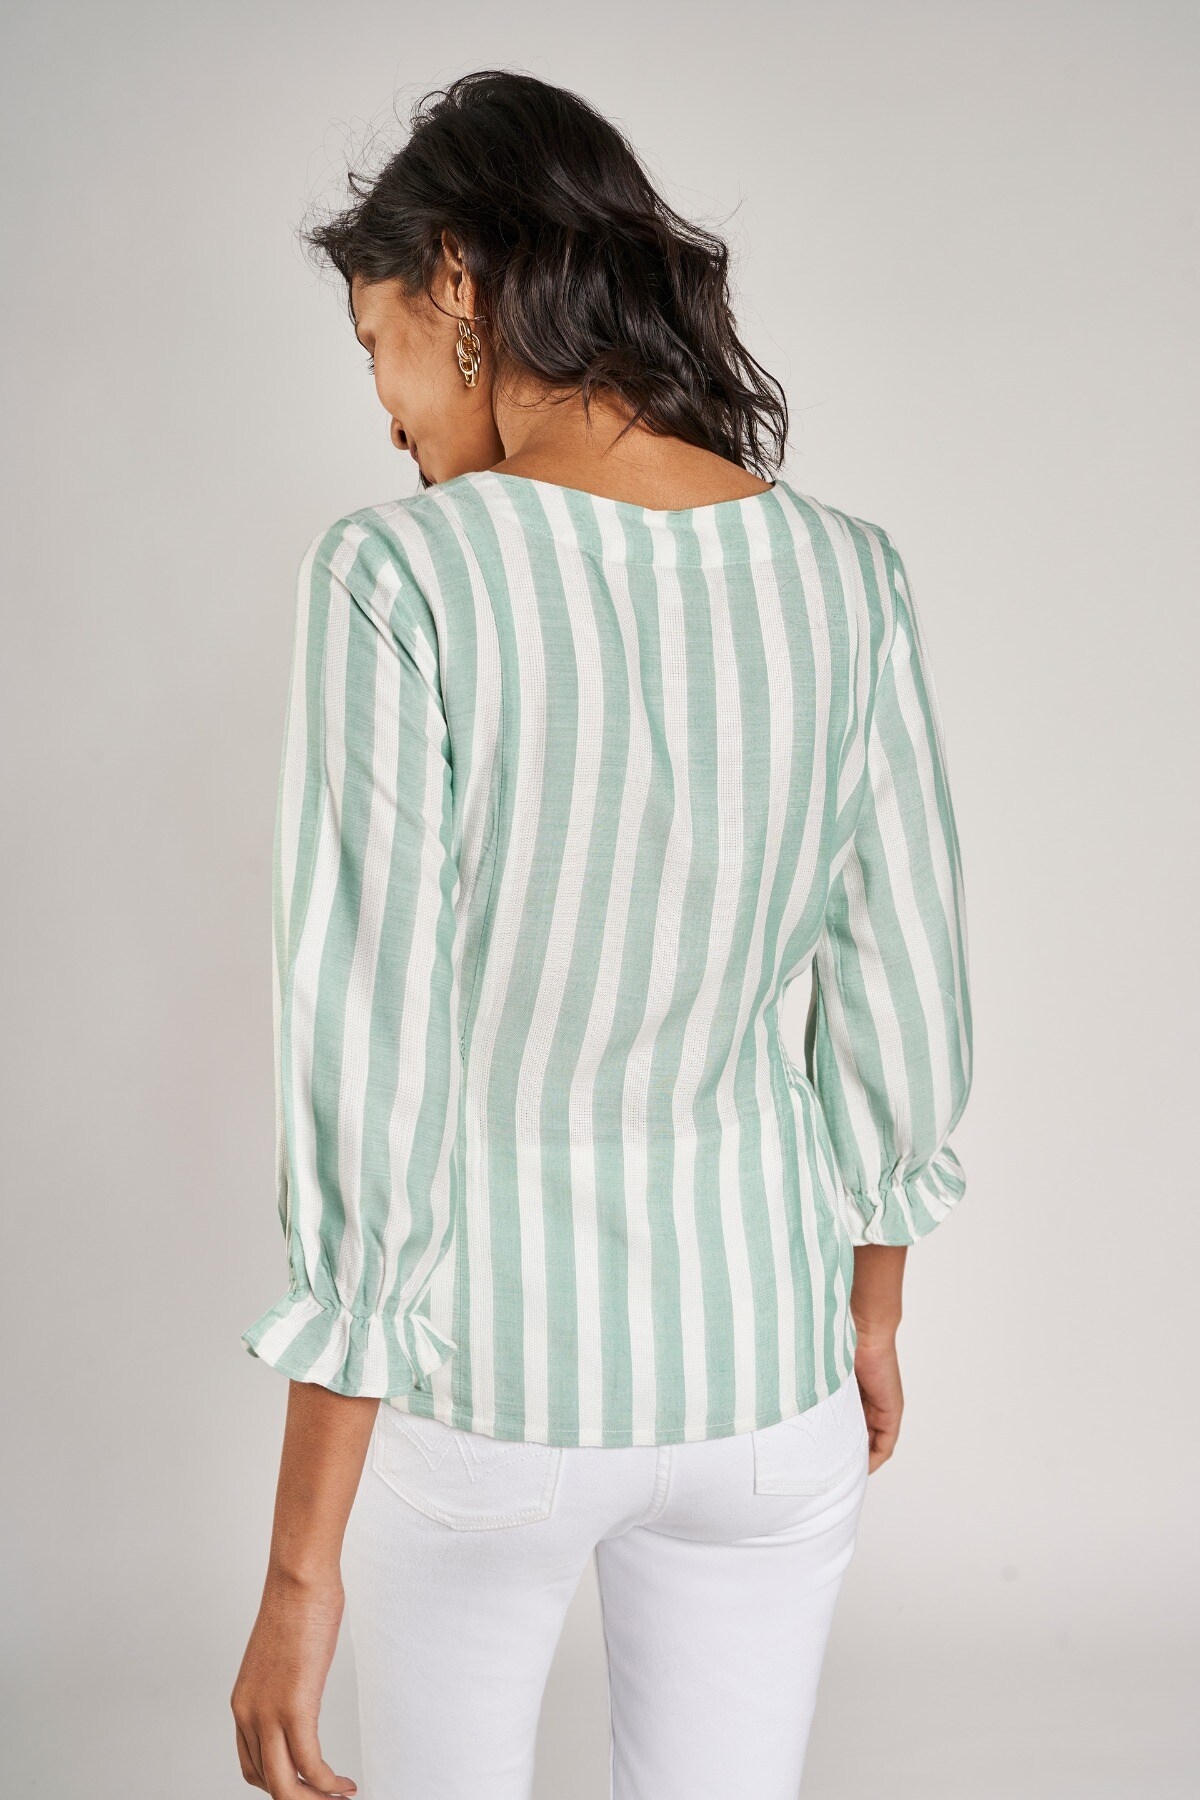 AND | AND SAGE GREEN TOP 1